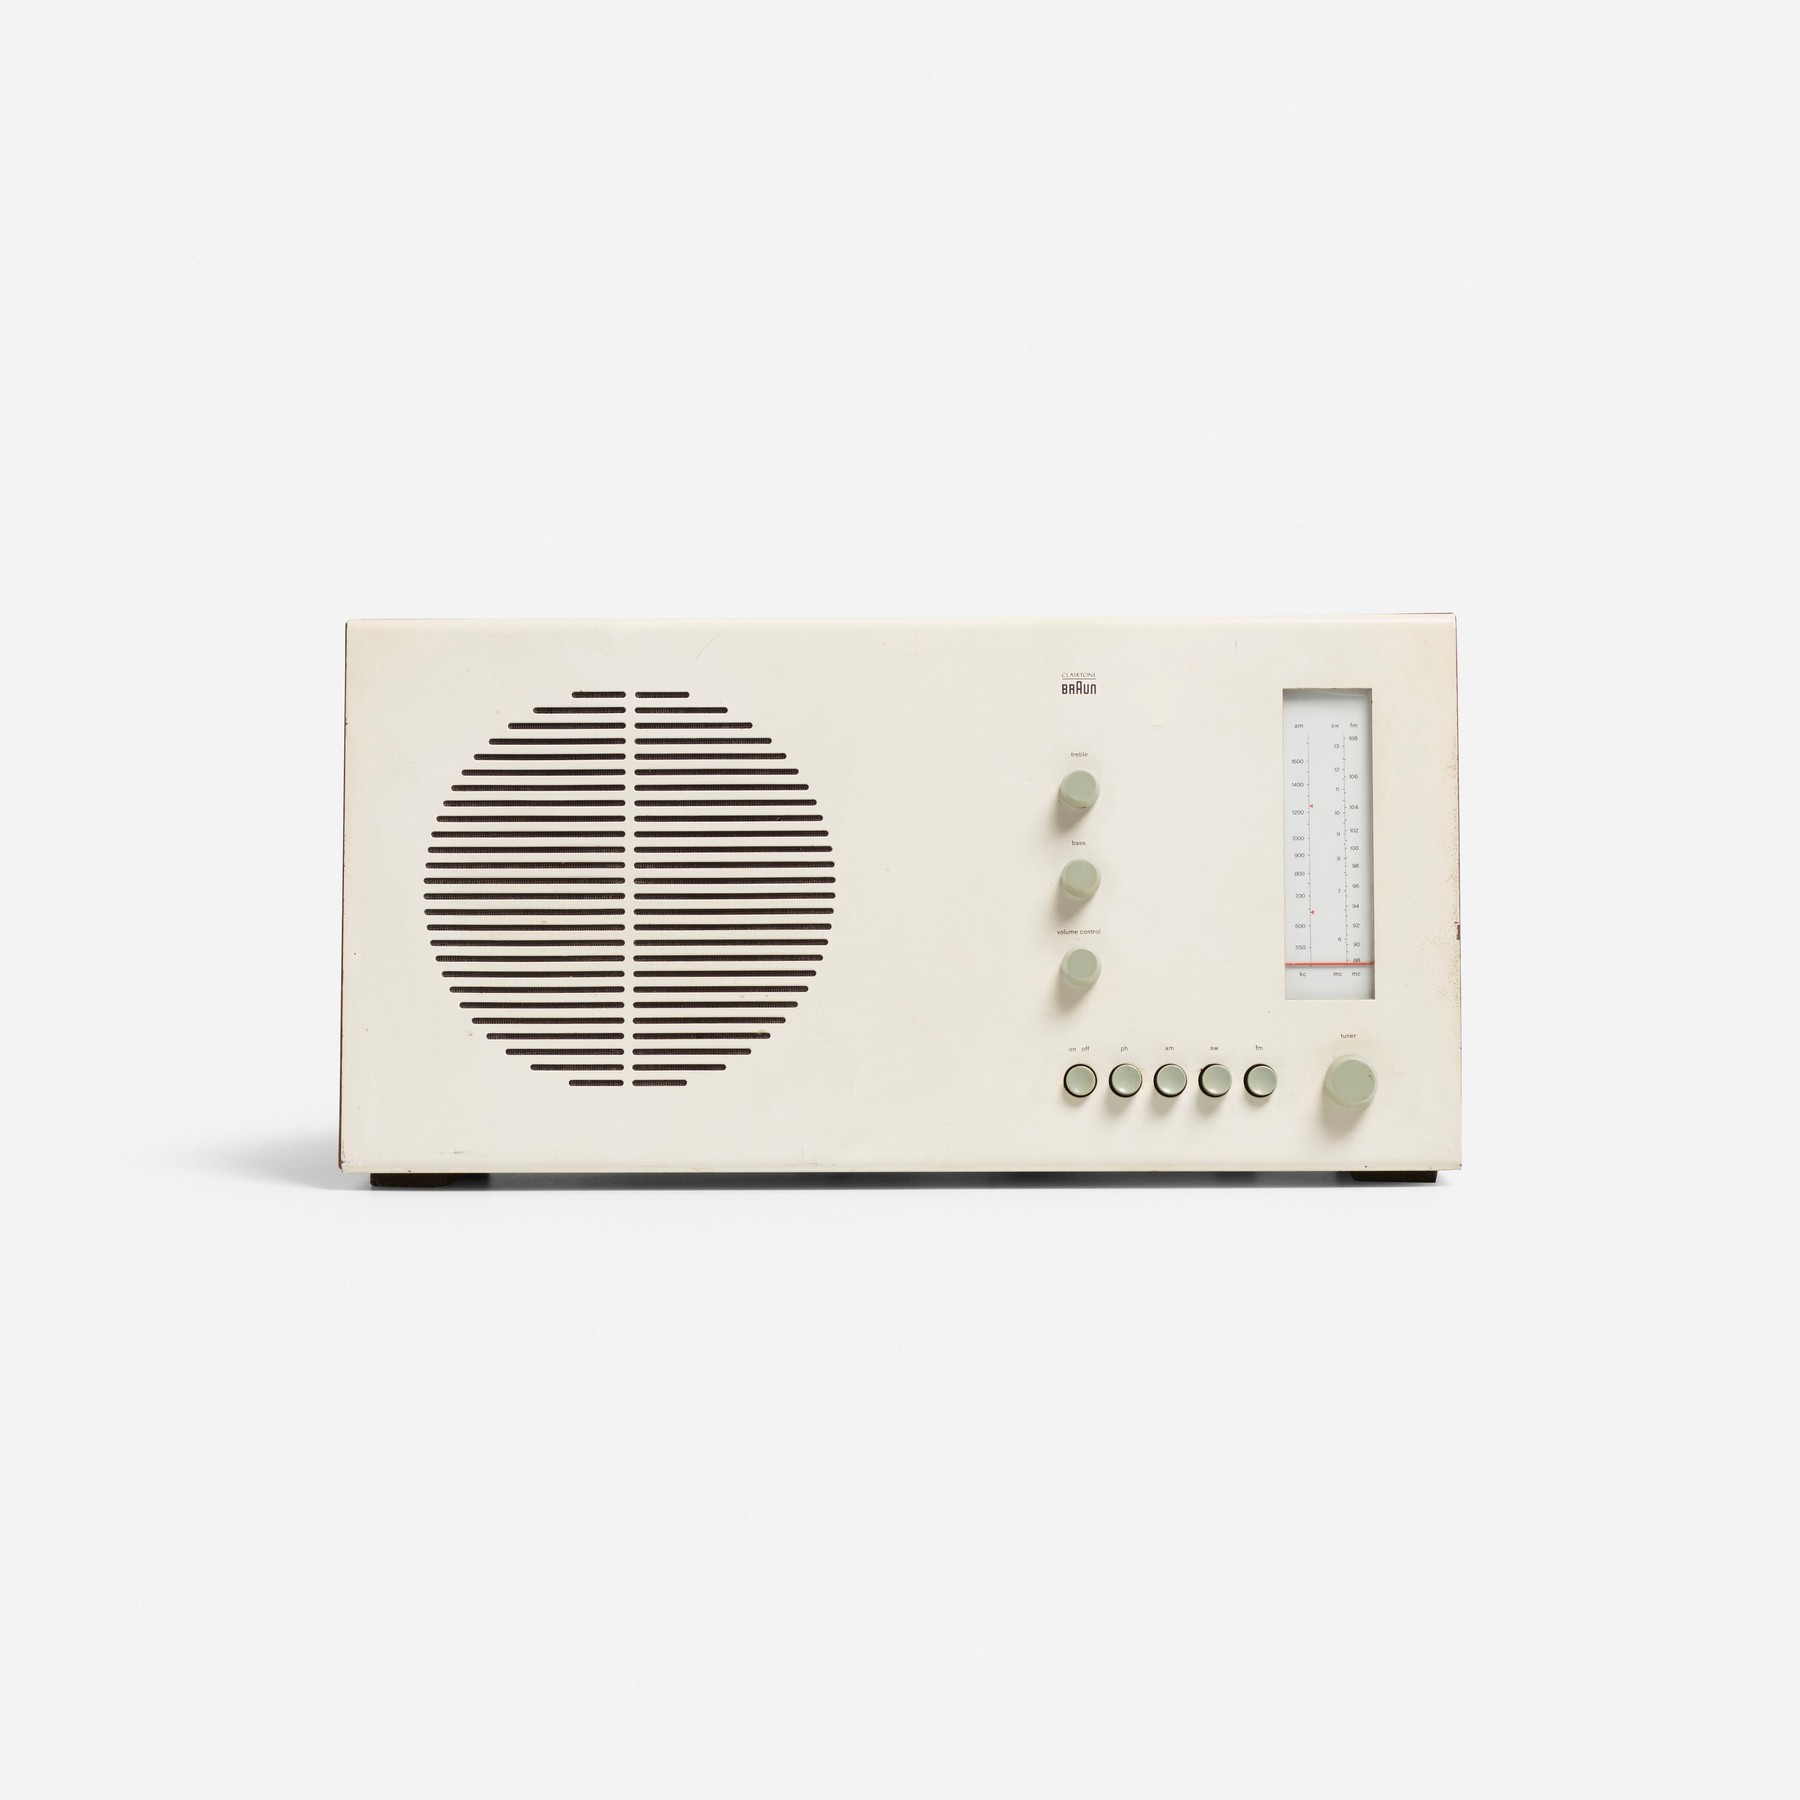 130_2_dieter_rams_the_jf_chen_collection_july_2018_dieter_rams_rt_20_radio__wright_auction.jpg